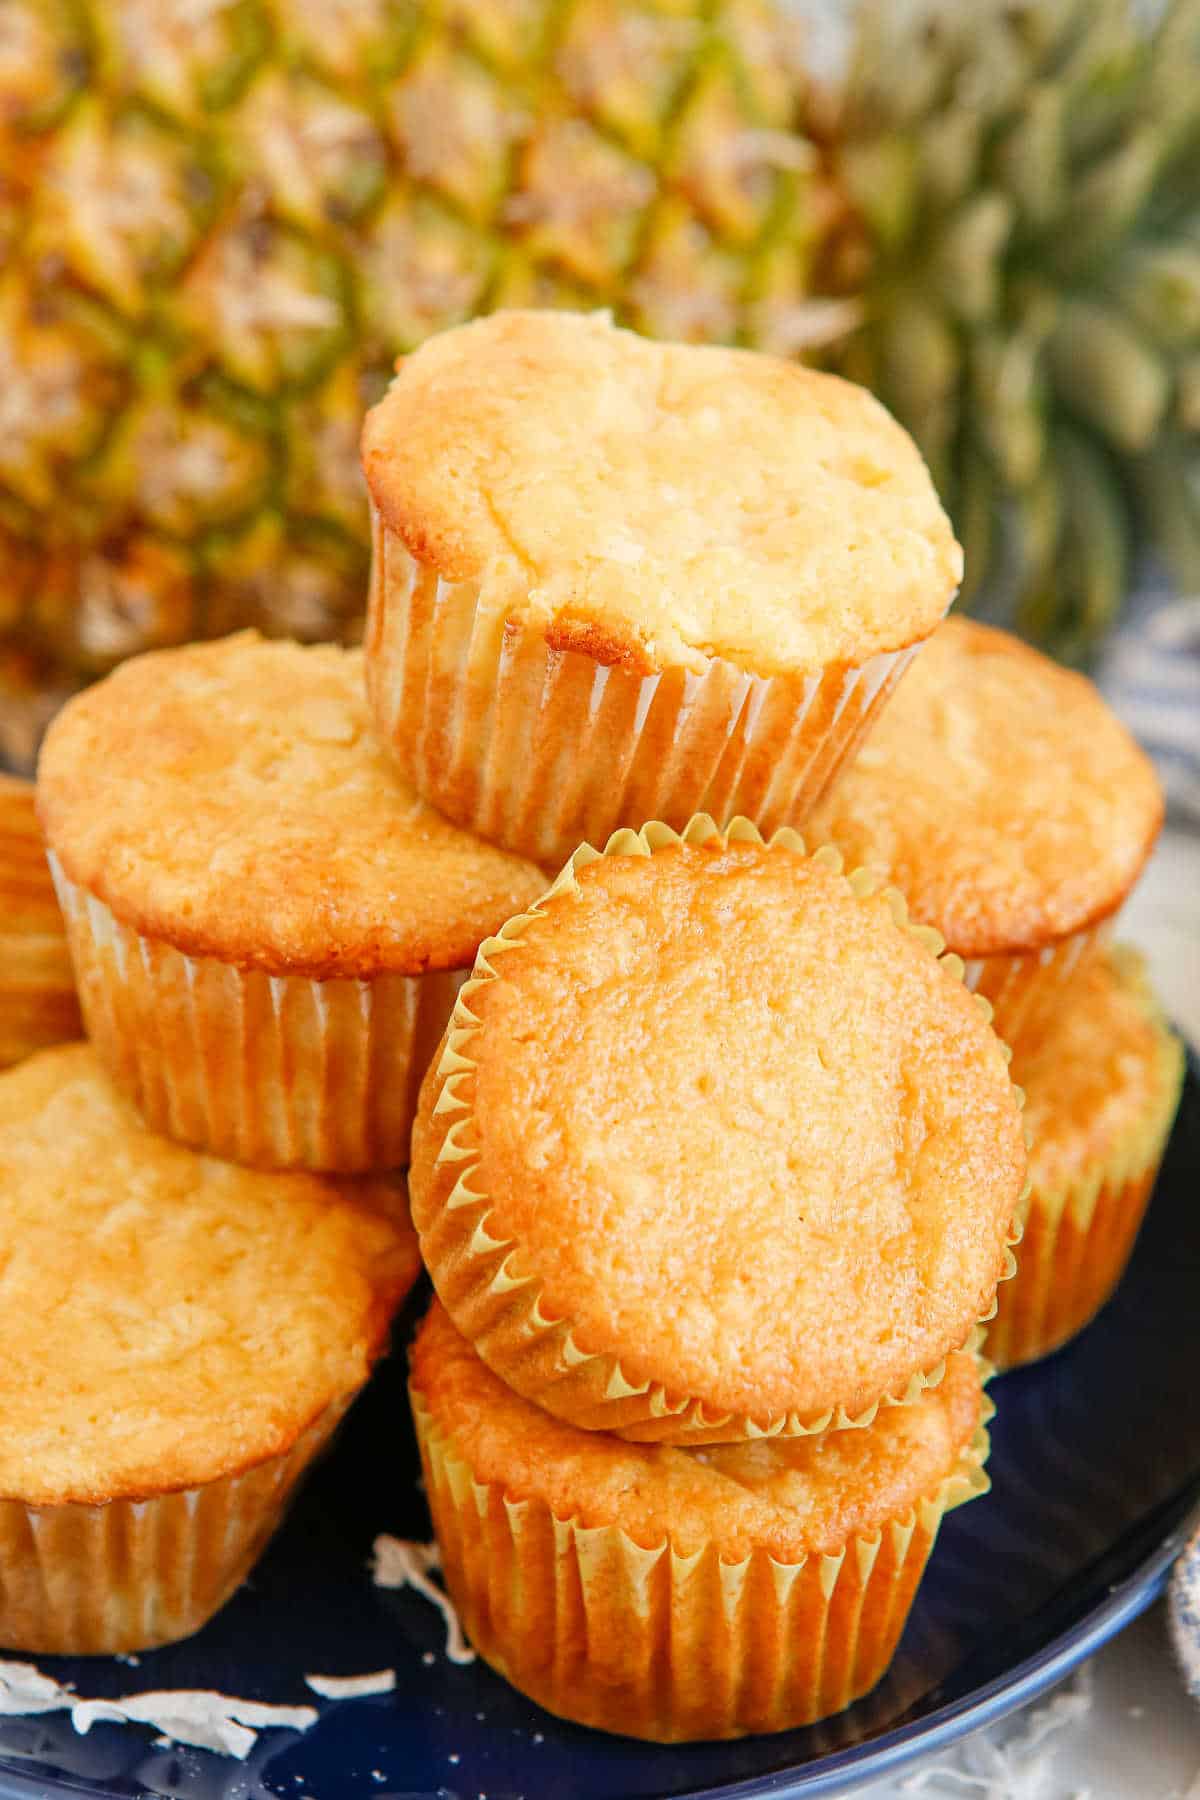 Pina colada muffins stacked on a plate.